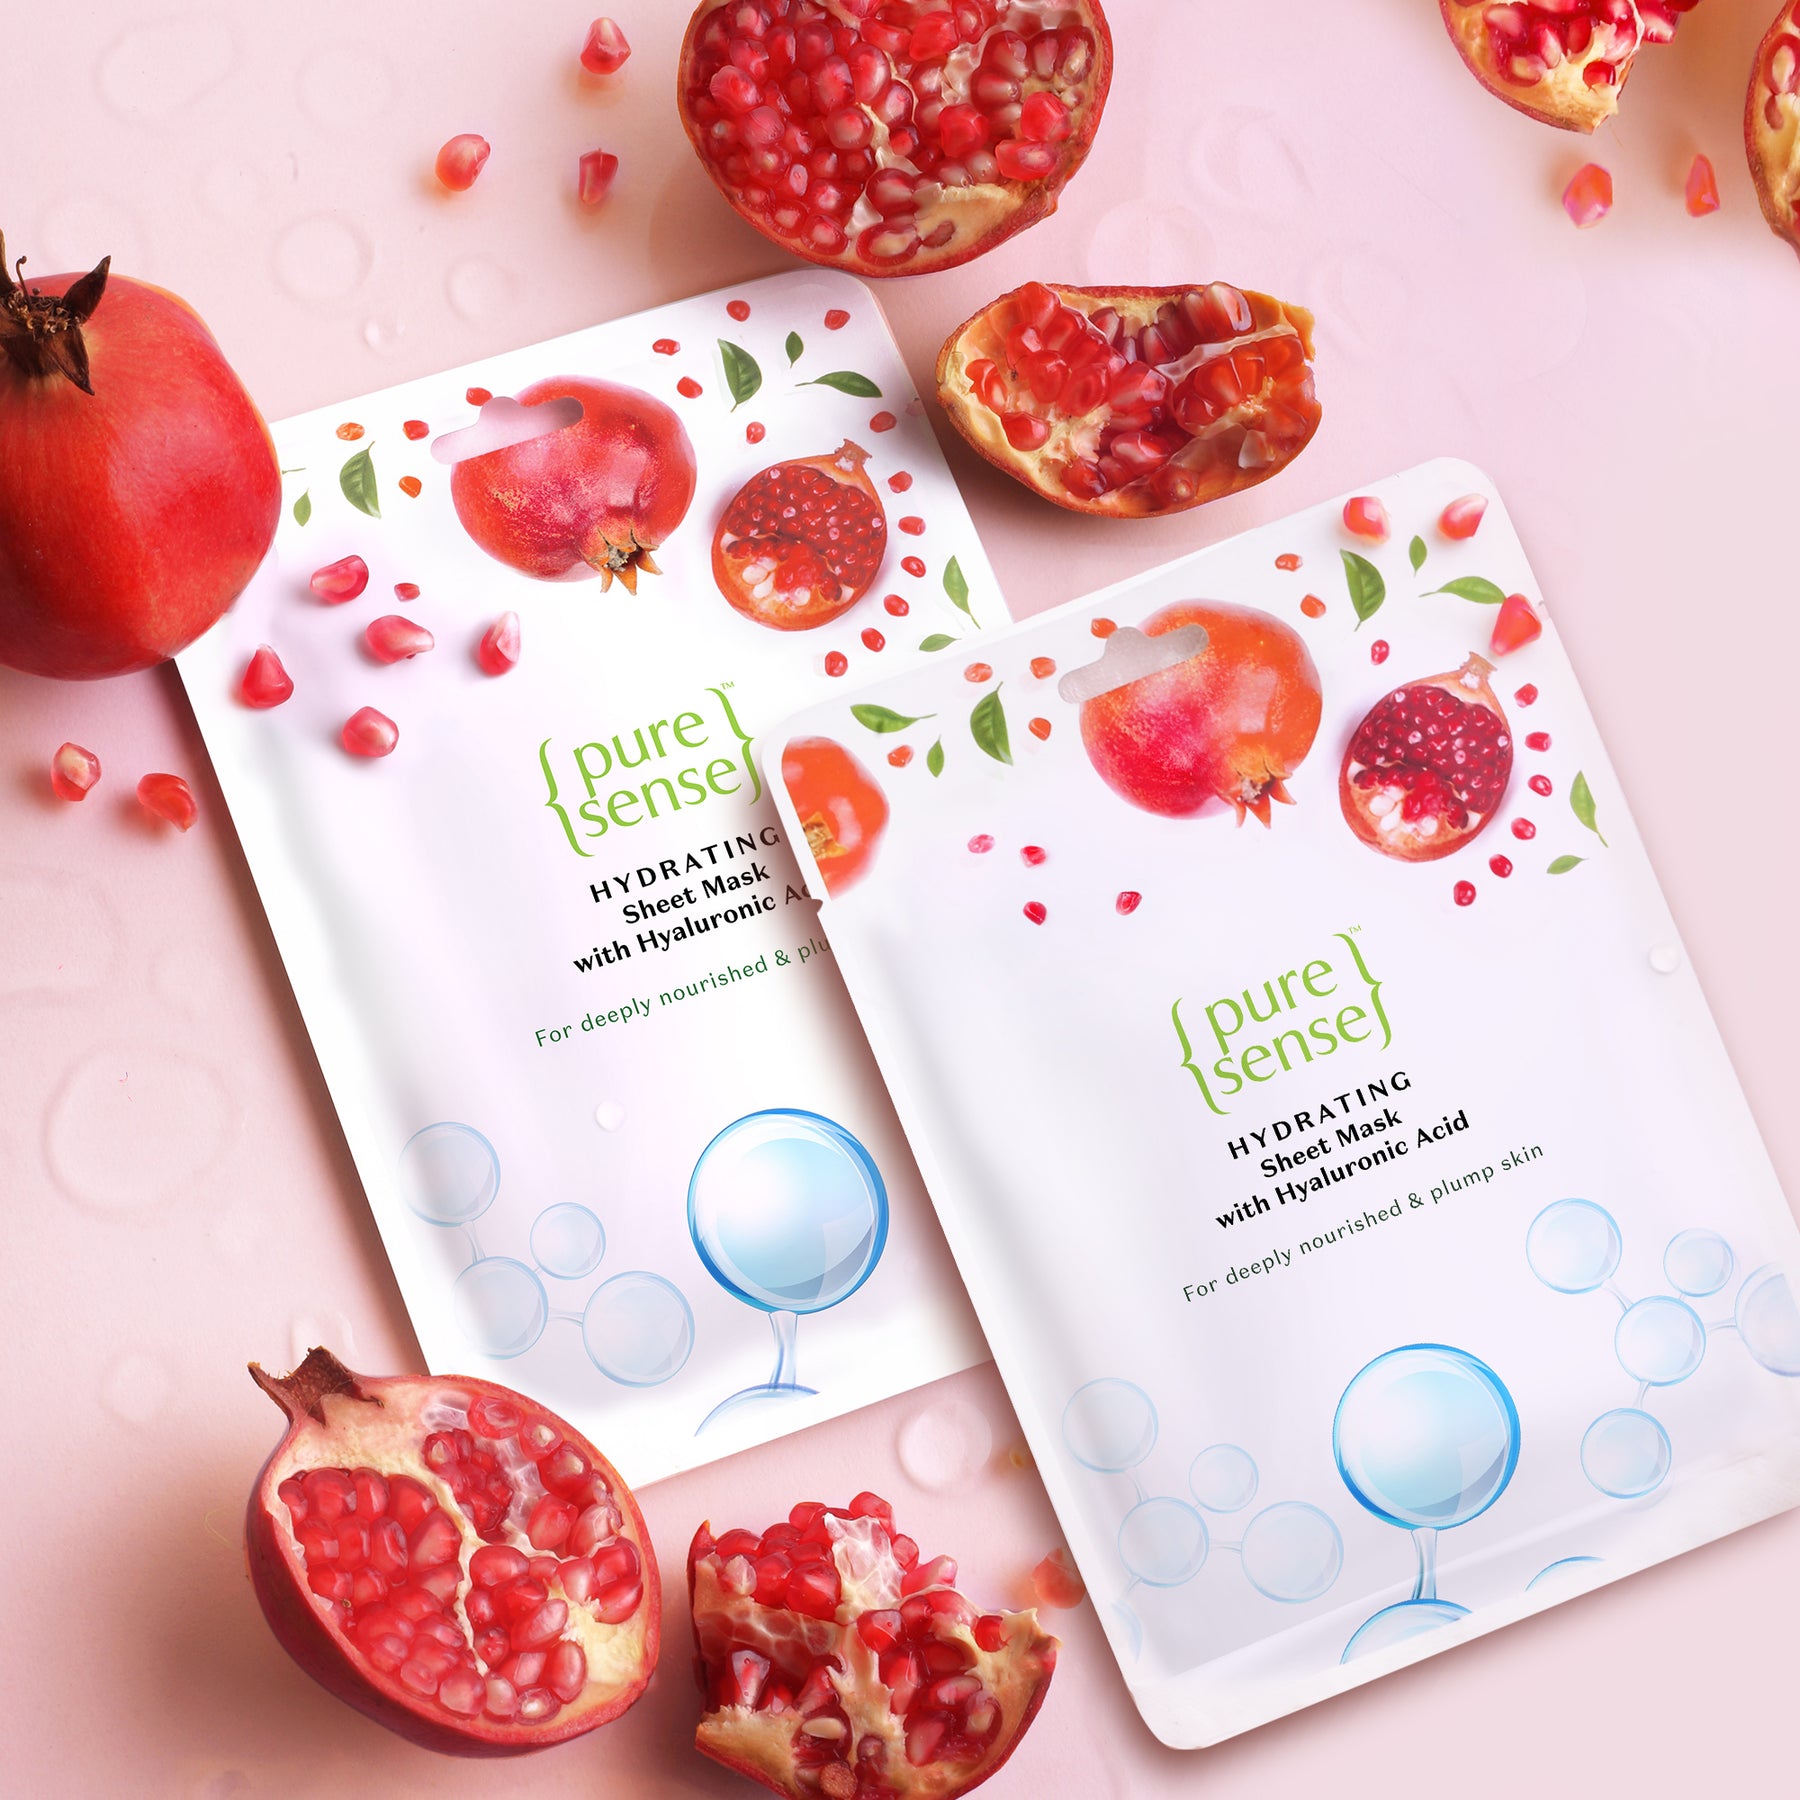 Hydrating Sheet Mask with Hyaluronic Acid | From the makers of Parachute Advansed | 30ml